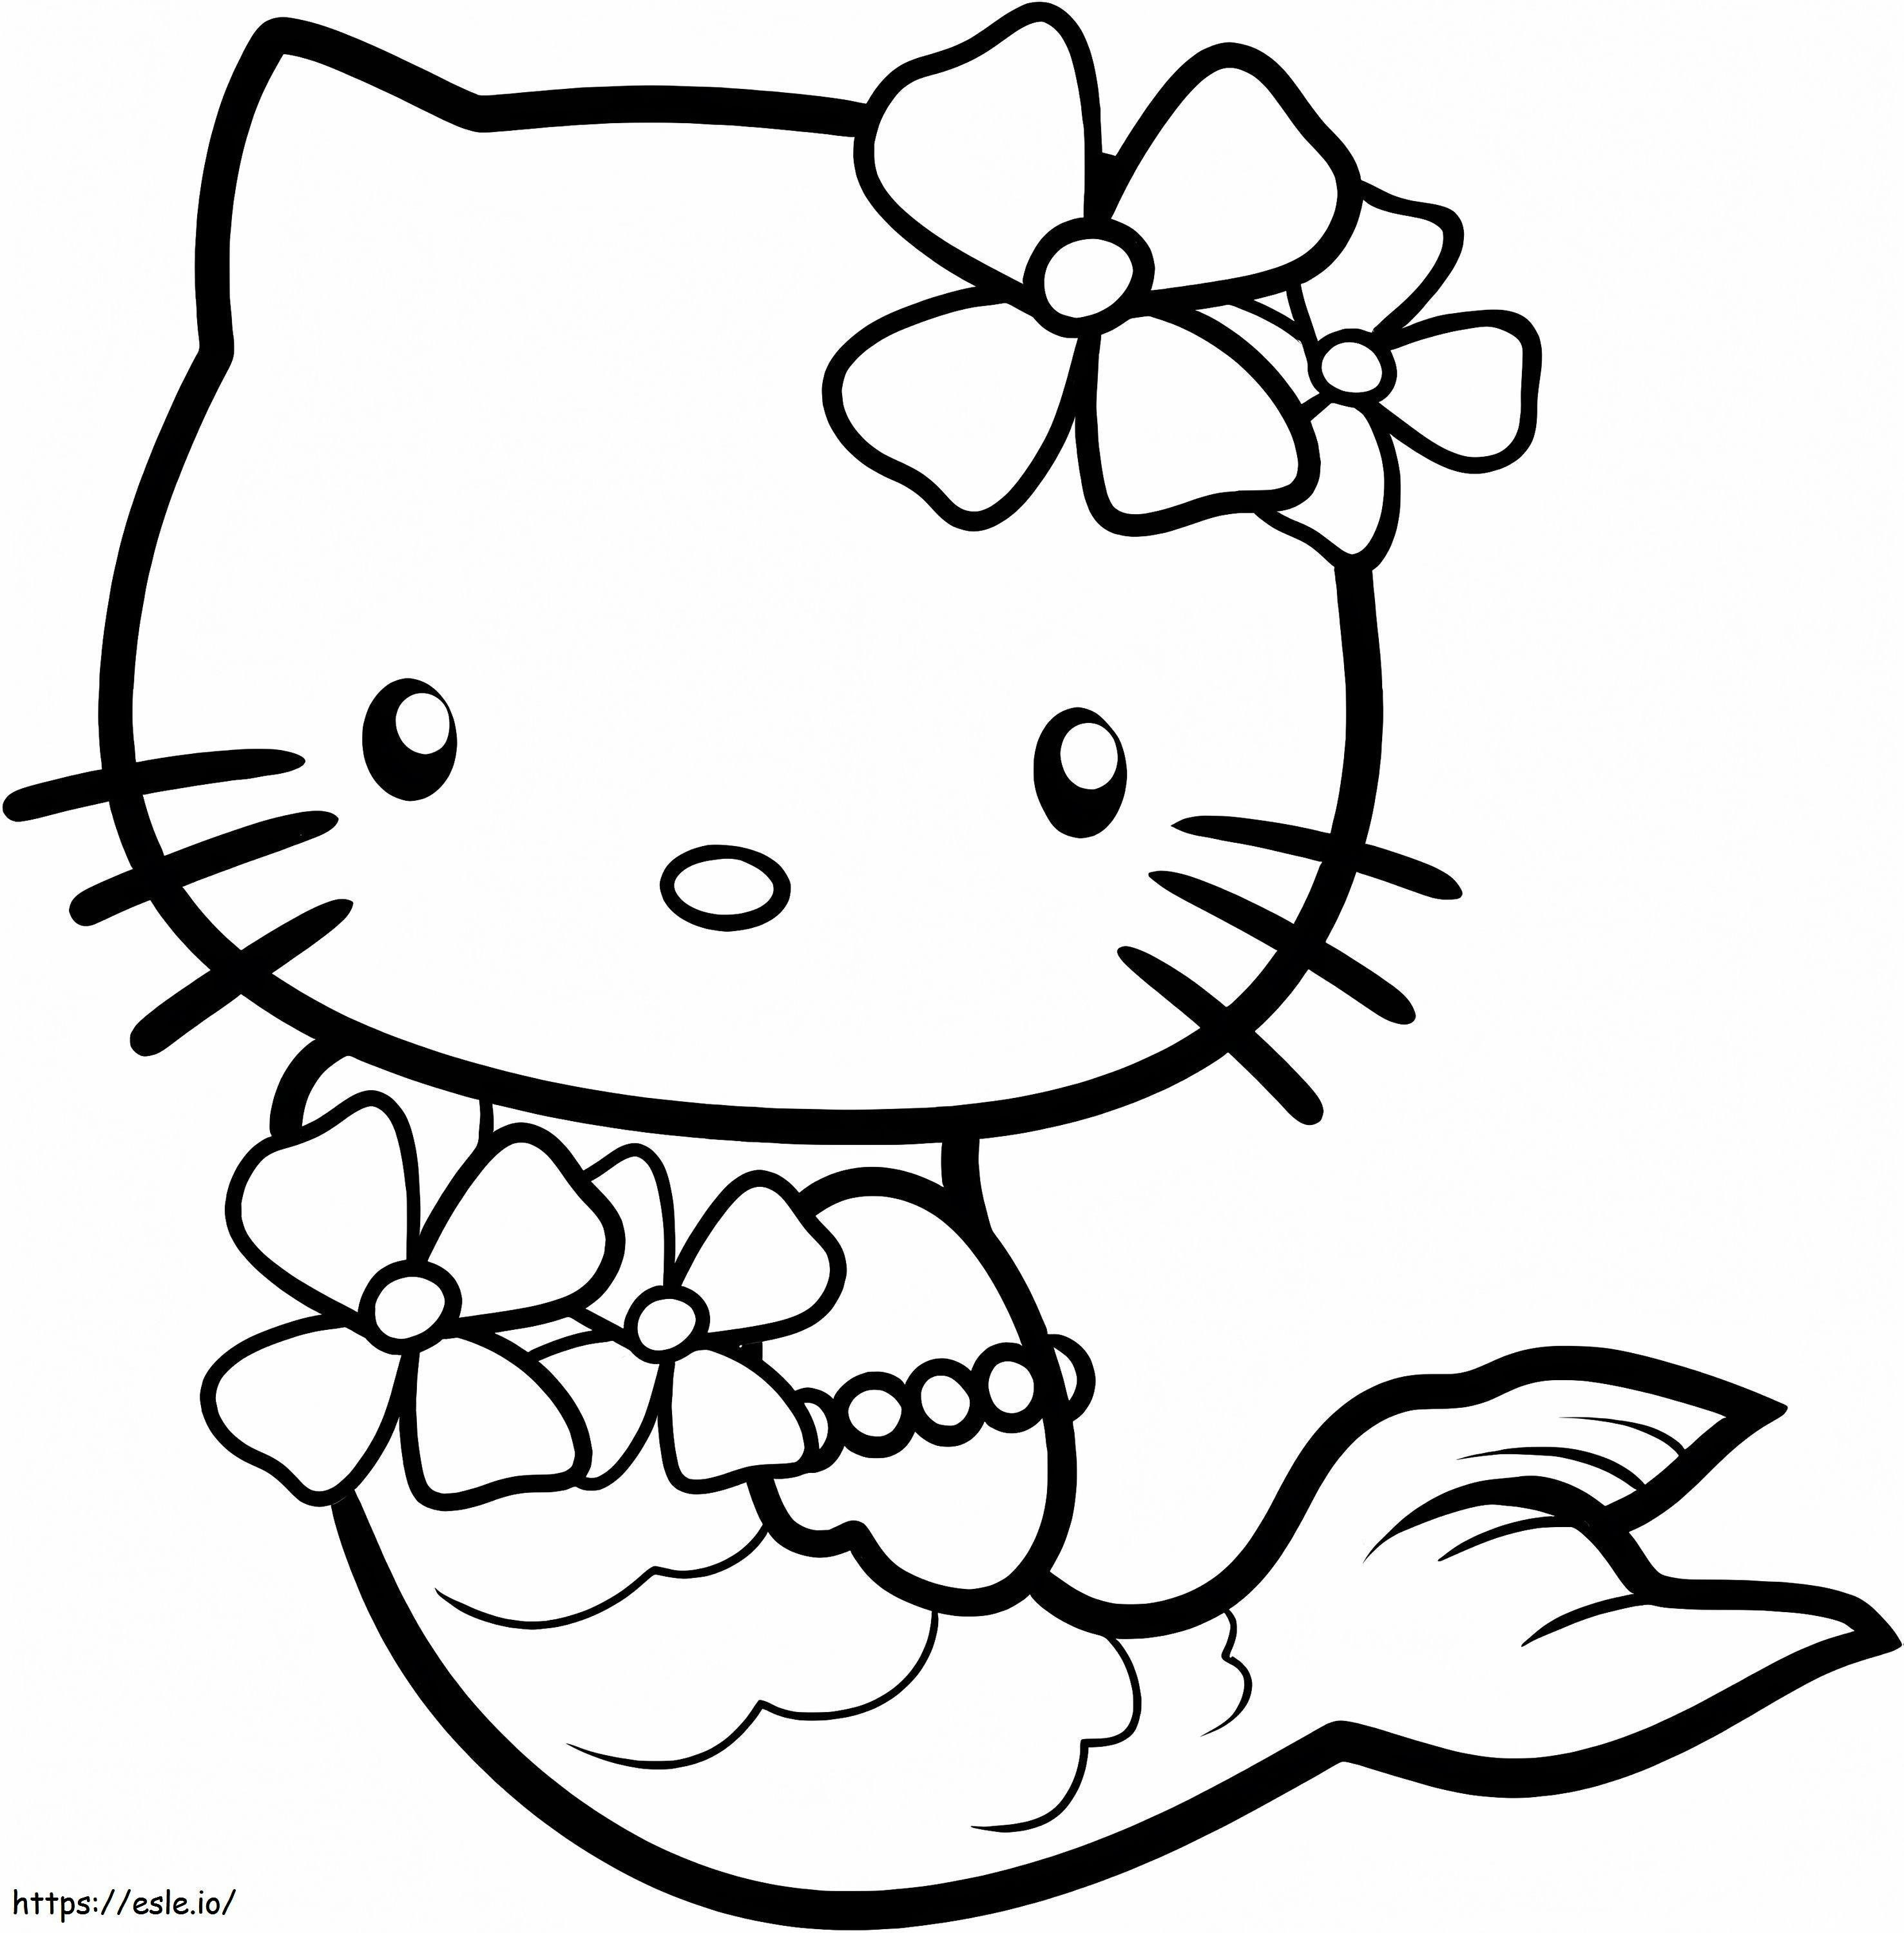 Mermaid Kitty coloring page